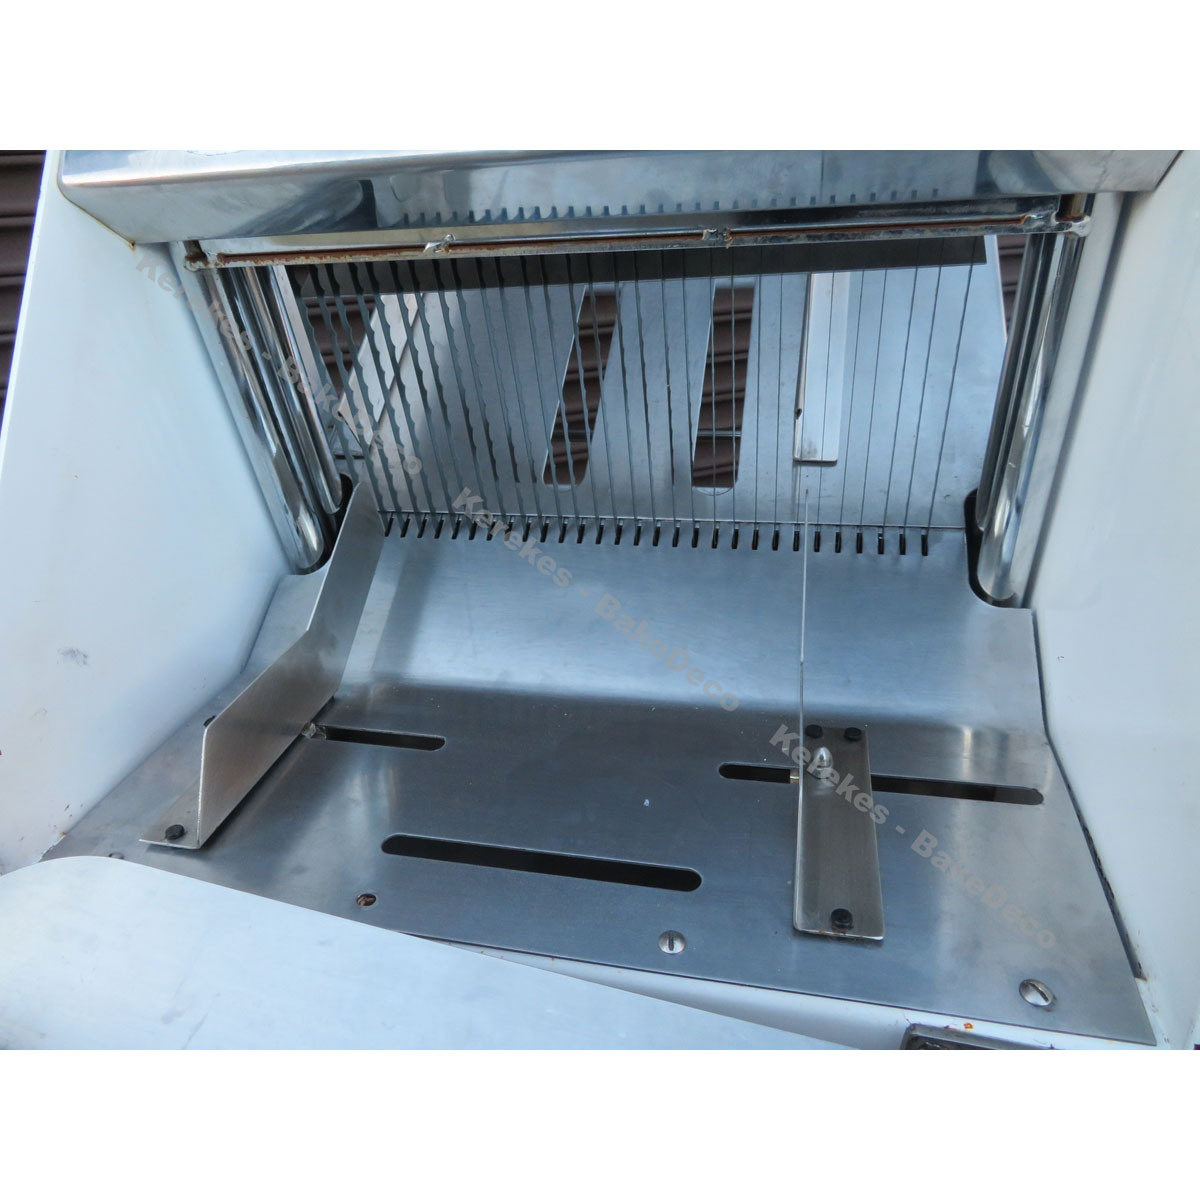 Berkel GMB-1/2 Gravity-Feed Bread Slicer, 1/2" Slices , Used Great Condition image 1